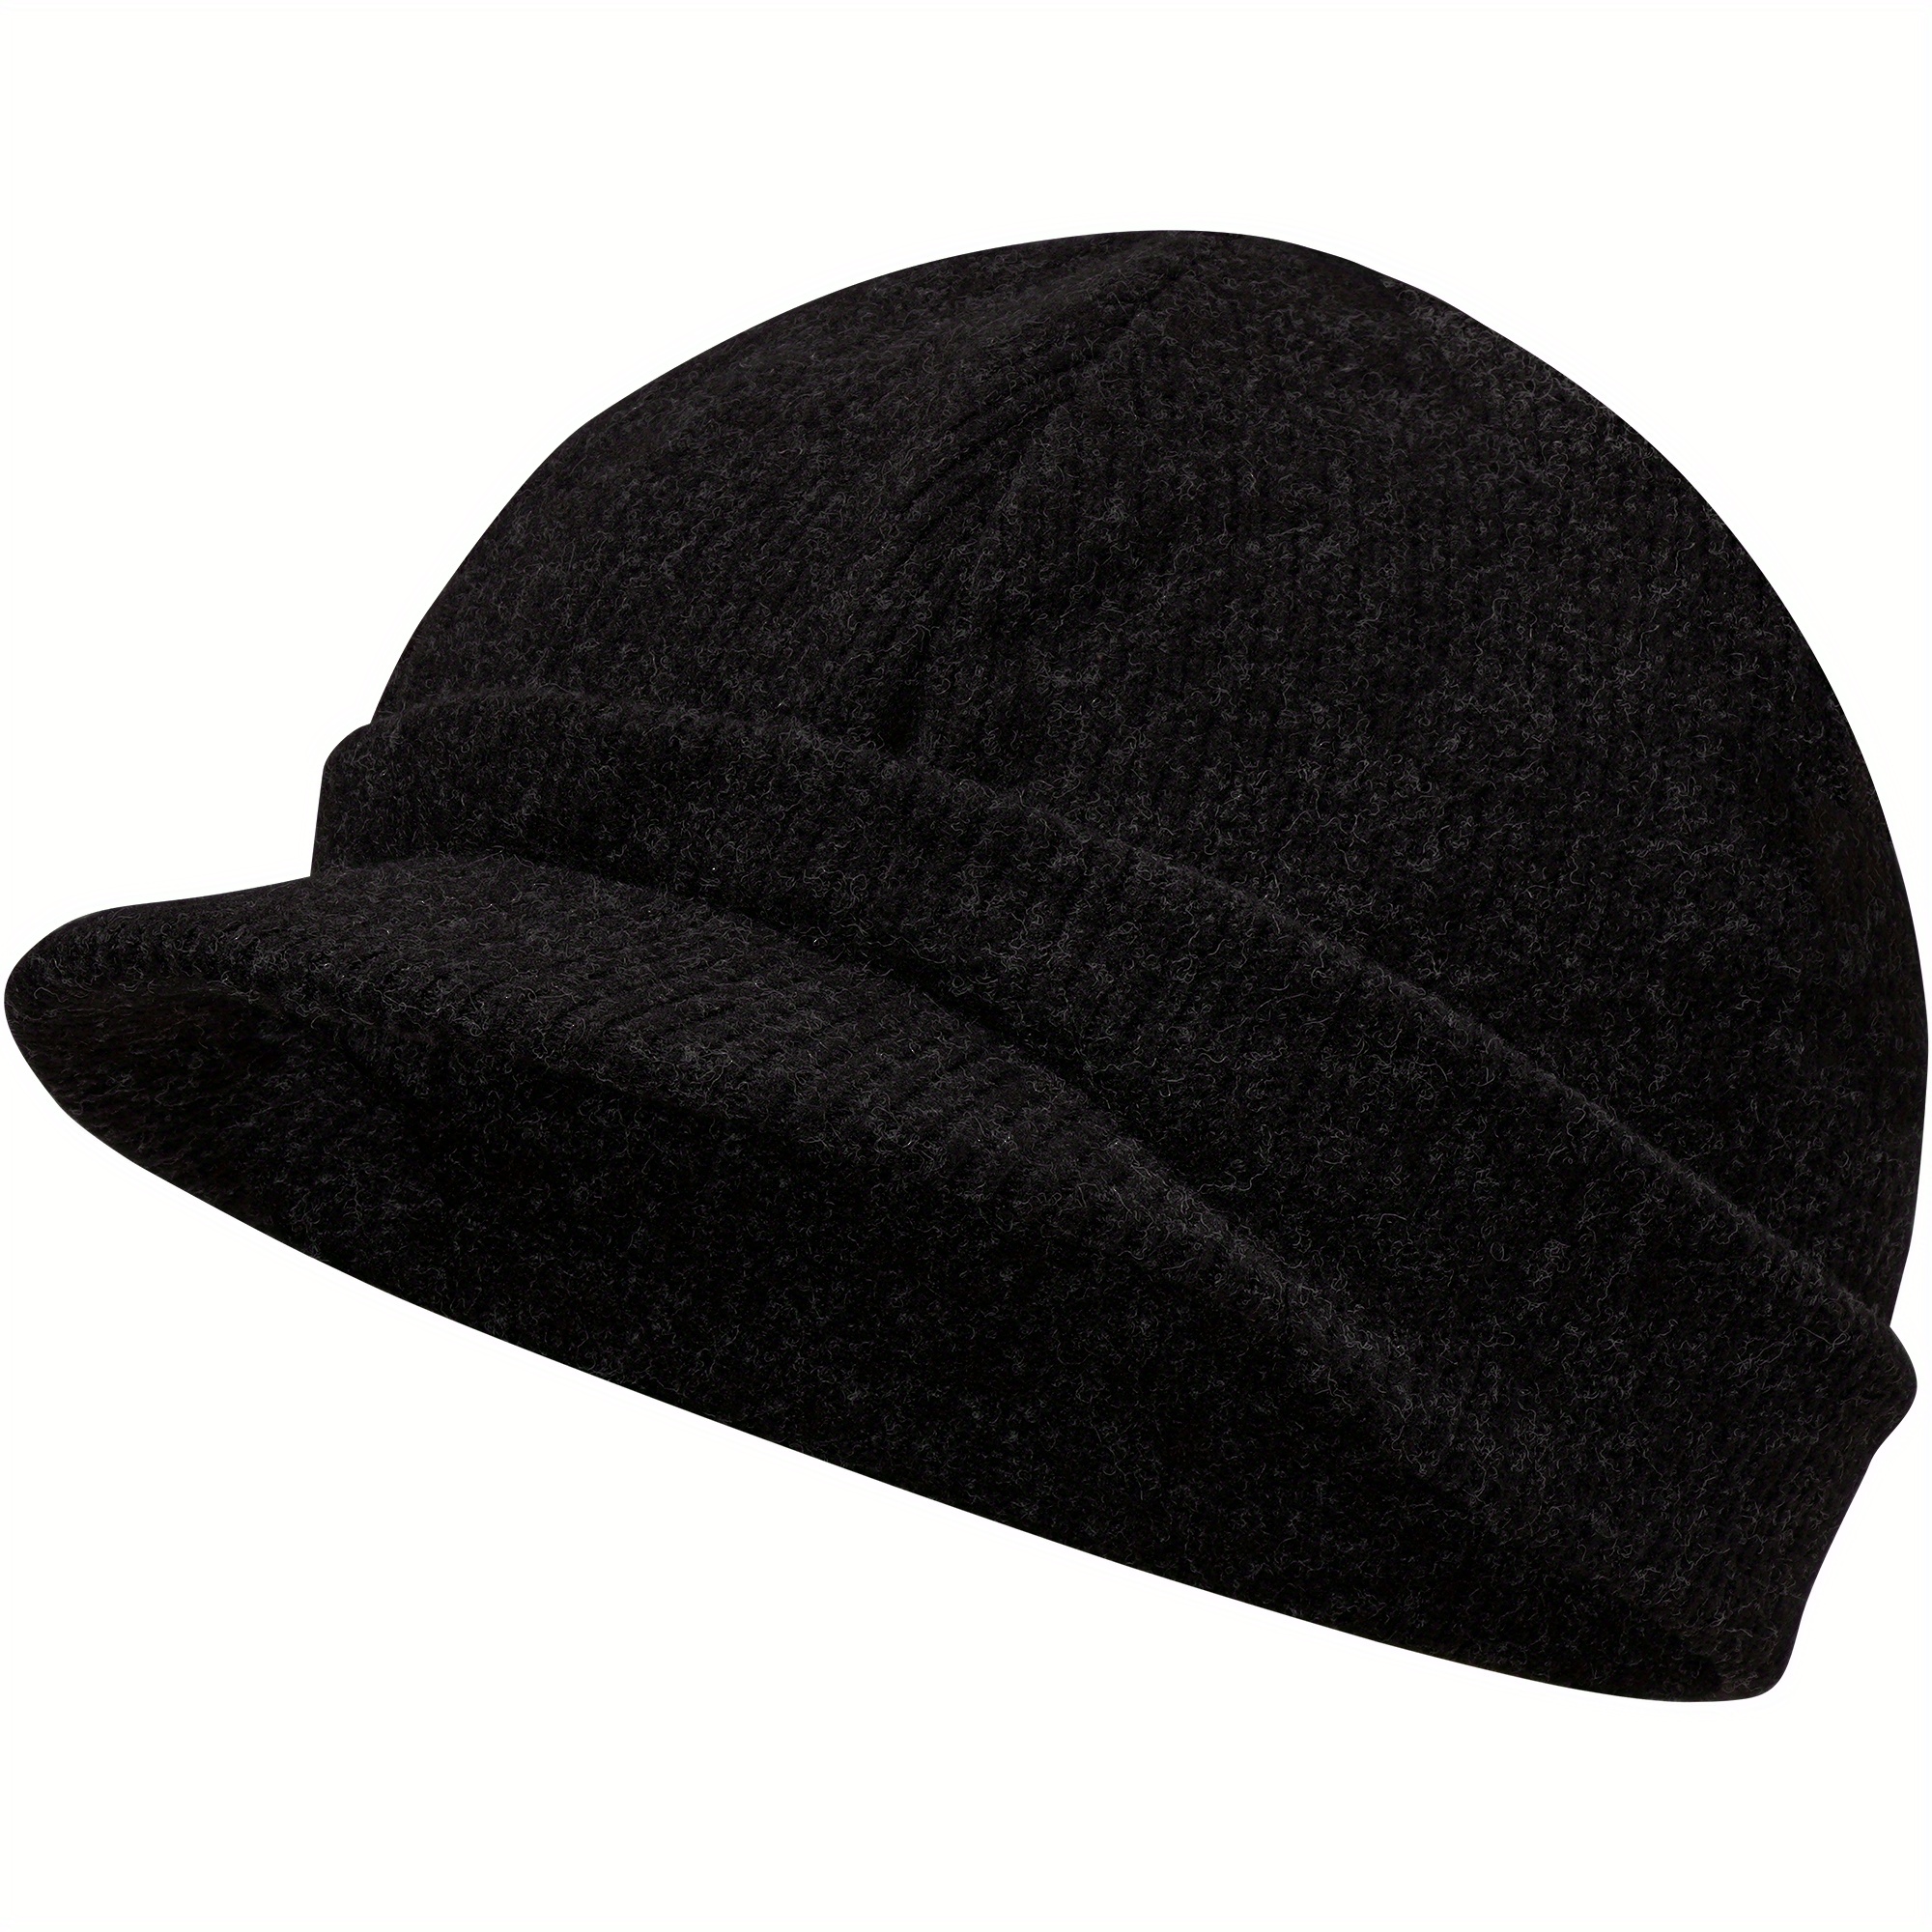 Favorite Slouchy Beanie for Men & Women - Thick & Warm - Stretchy